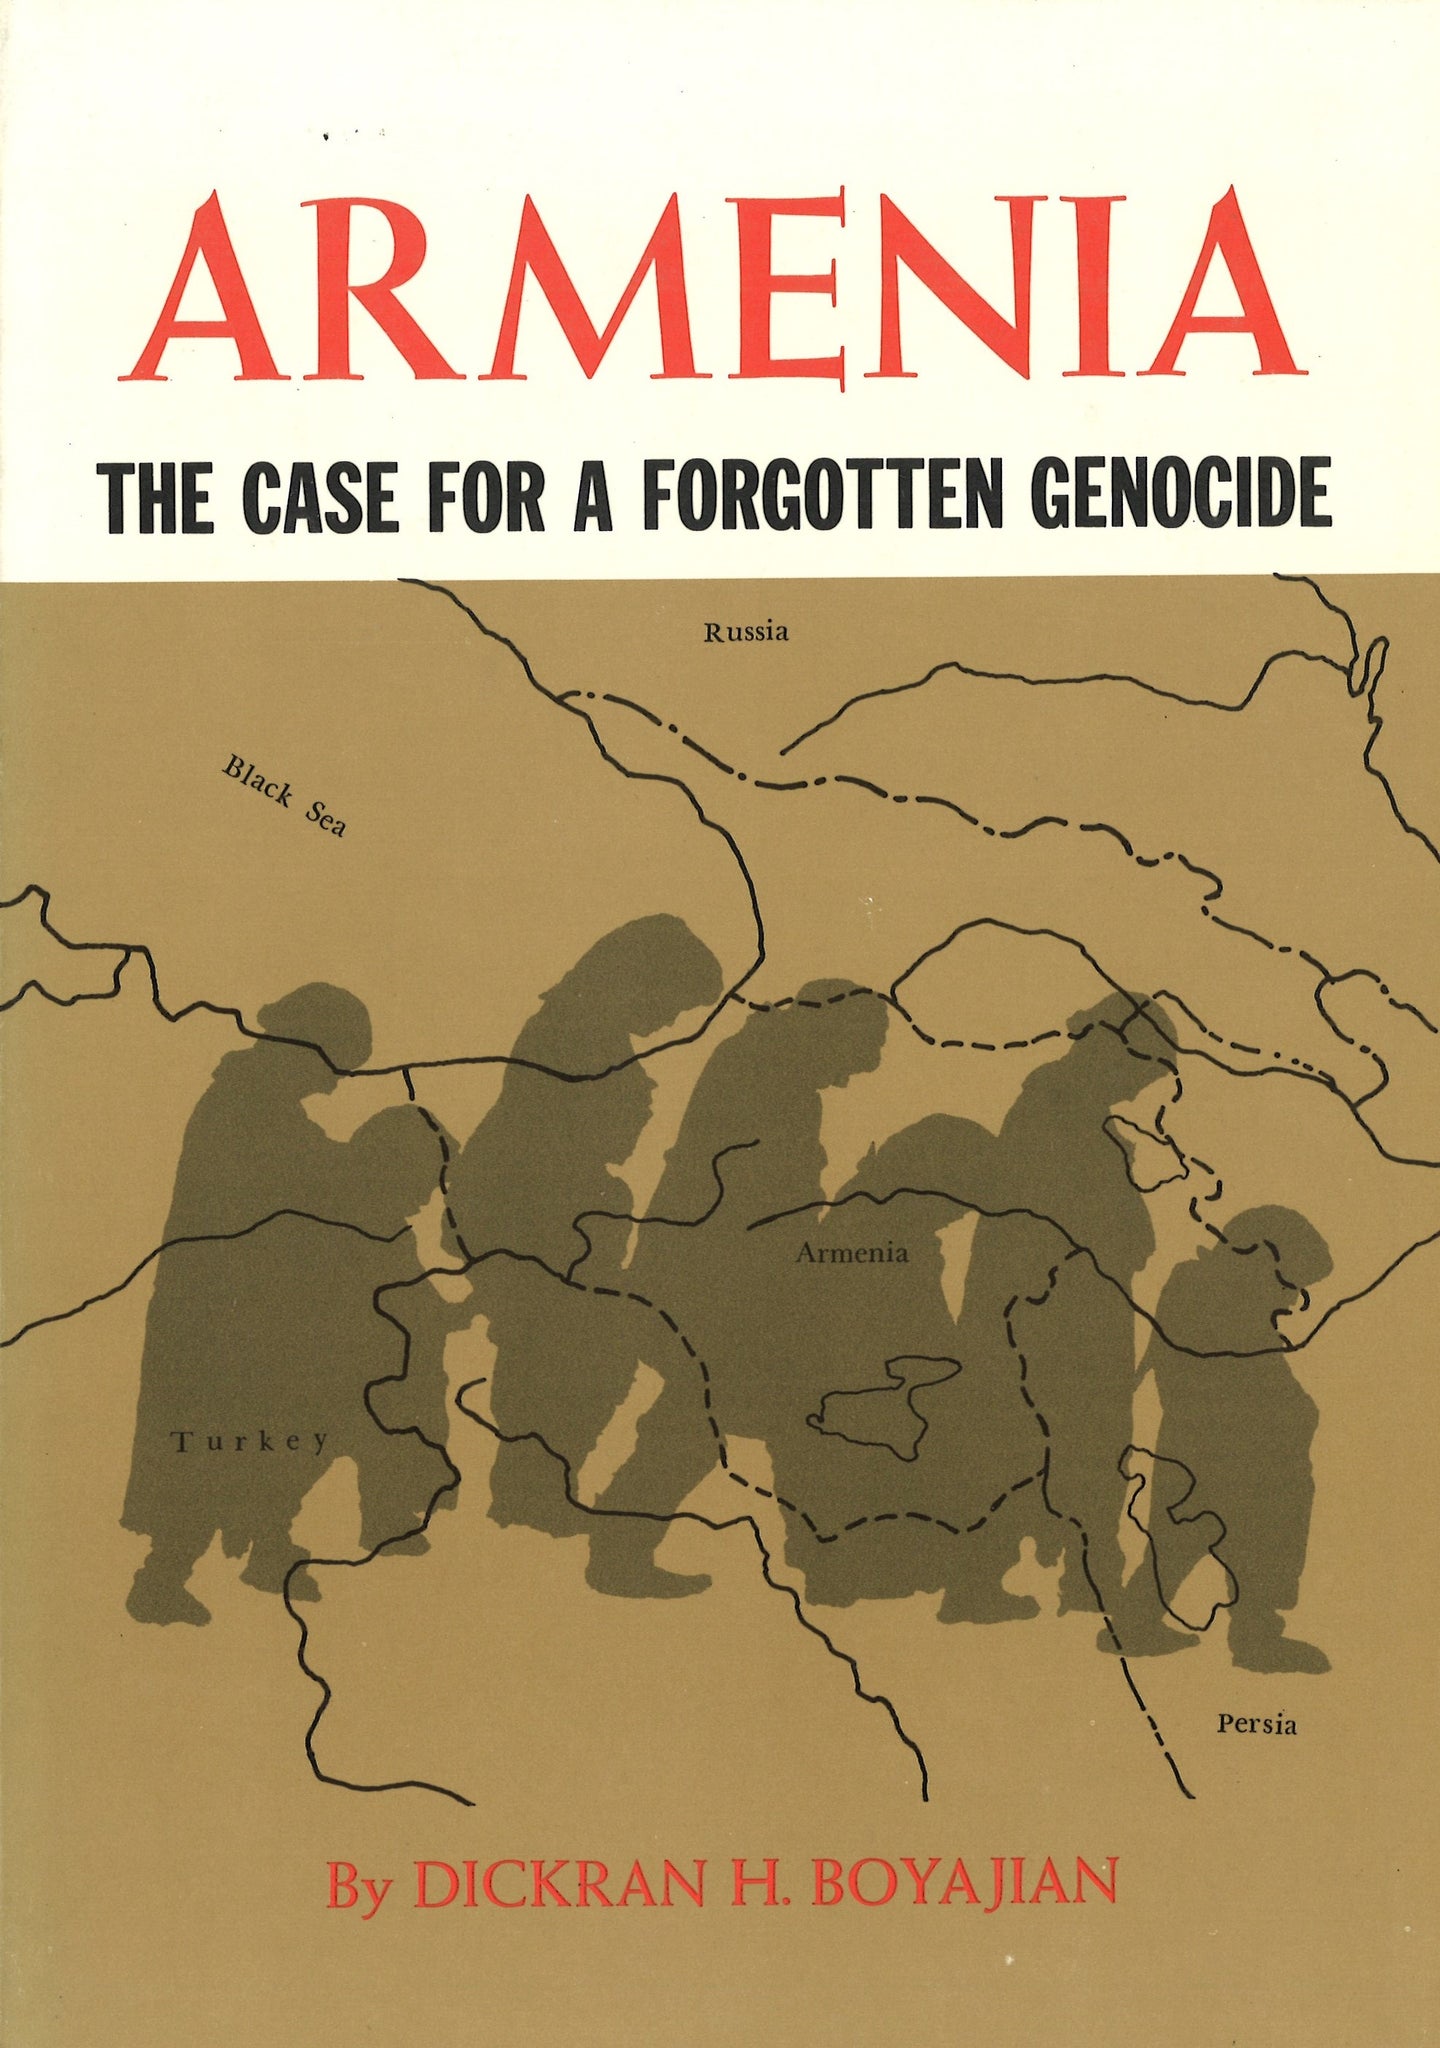 Armenia: The Case for a Forgotten Genocide